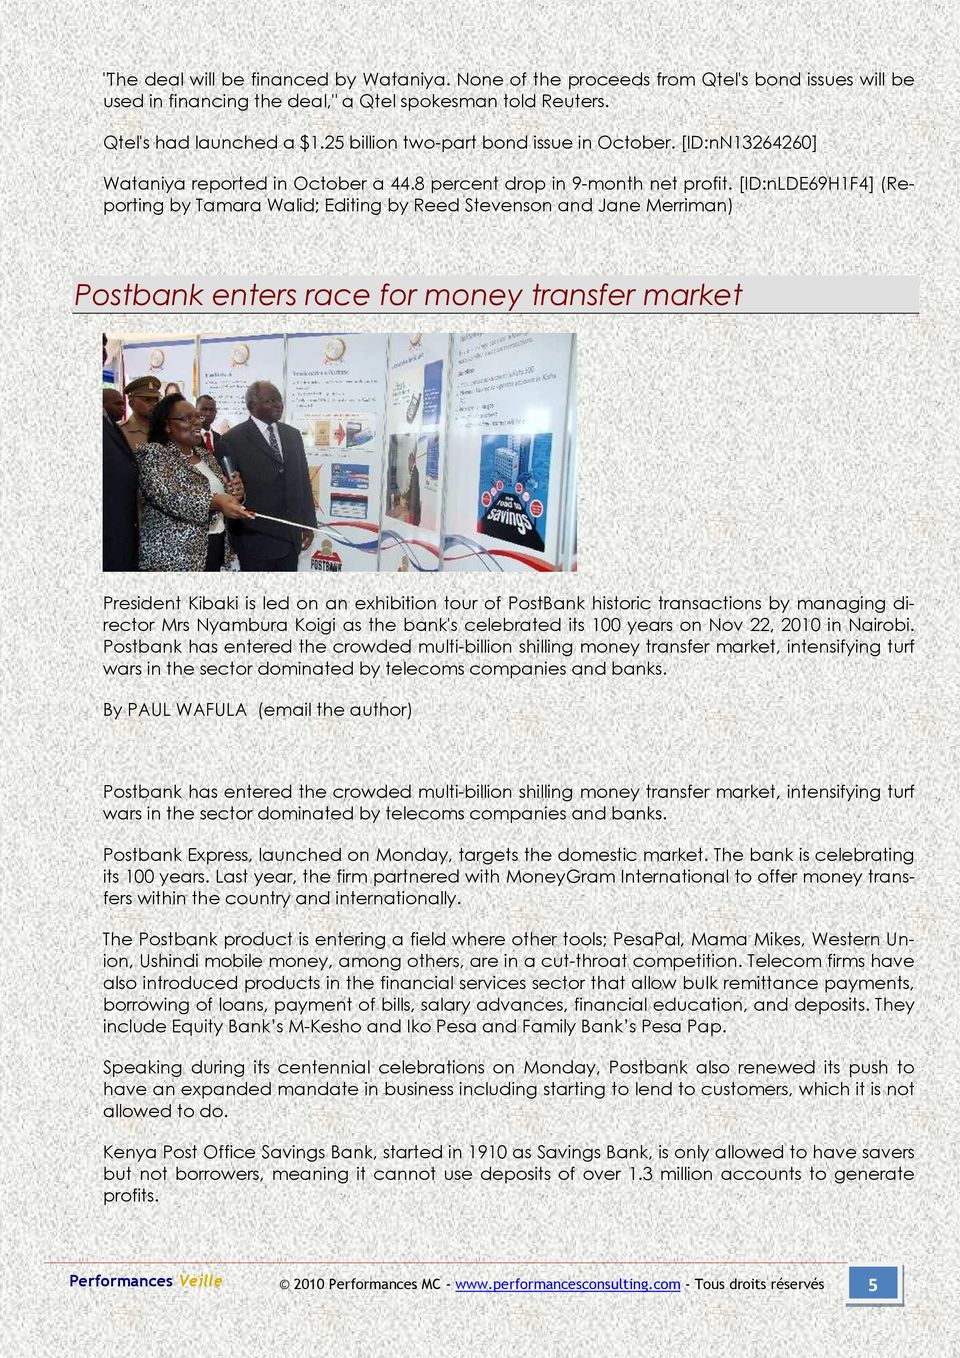 [ID:nLDE69H1F4] (Reporting by Tamara Walid; Editing by Reed Stevenson and Jane Merriman) Postbank enters race for money transfer market President Kibaki is led on an exhibition tour of PostBank